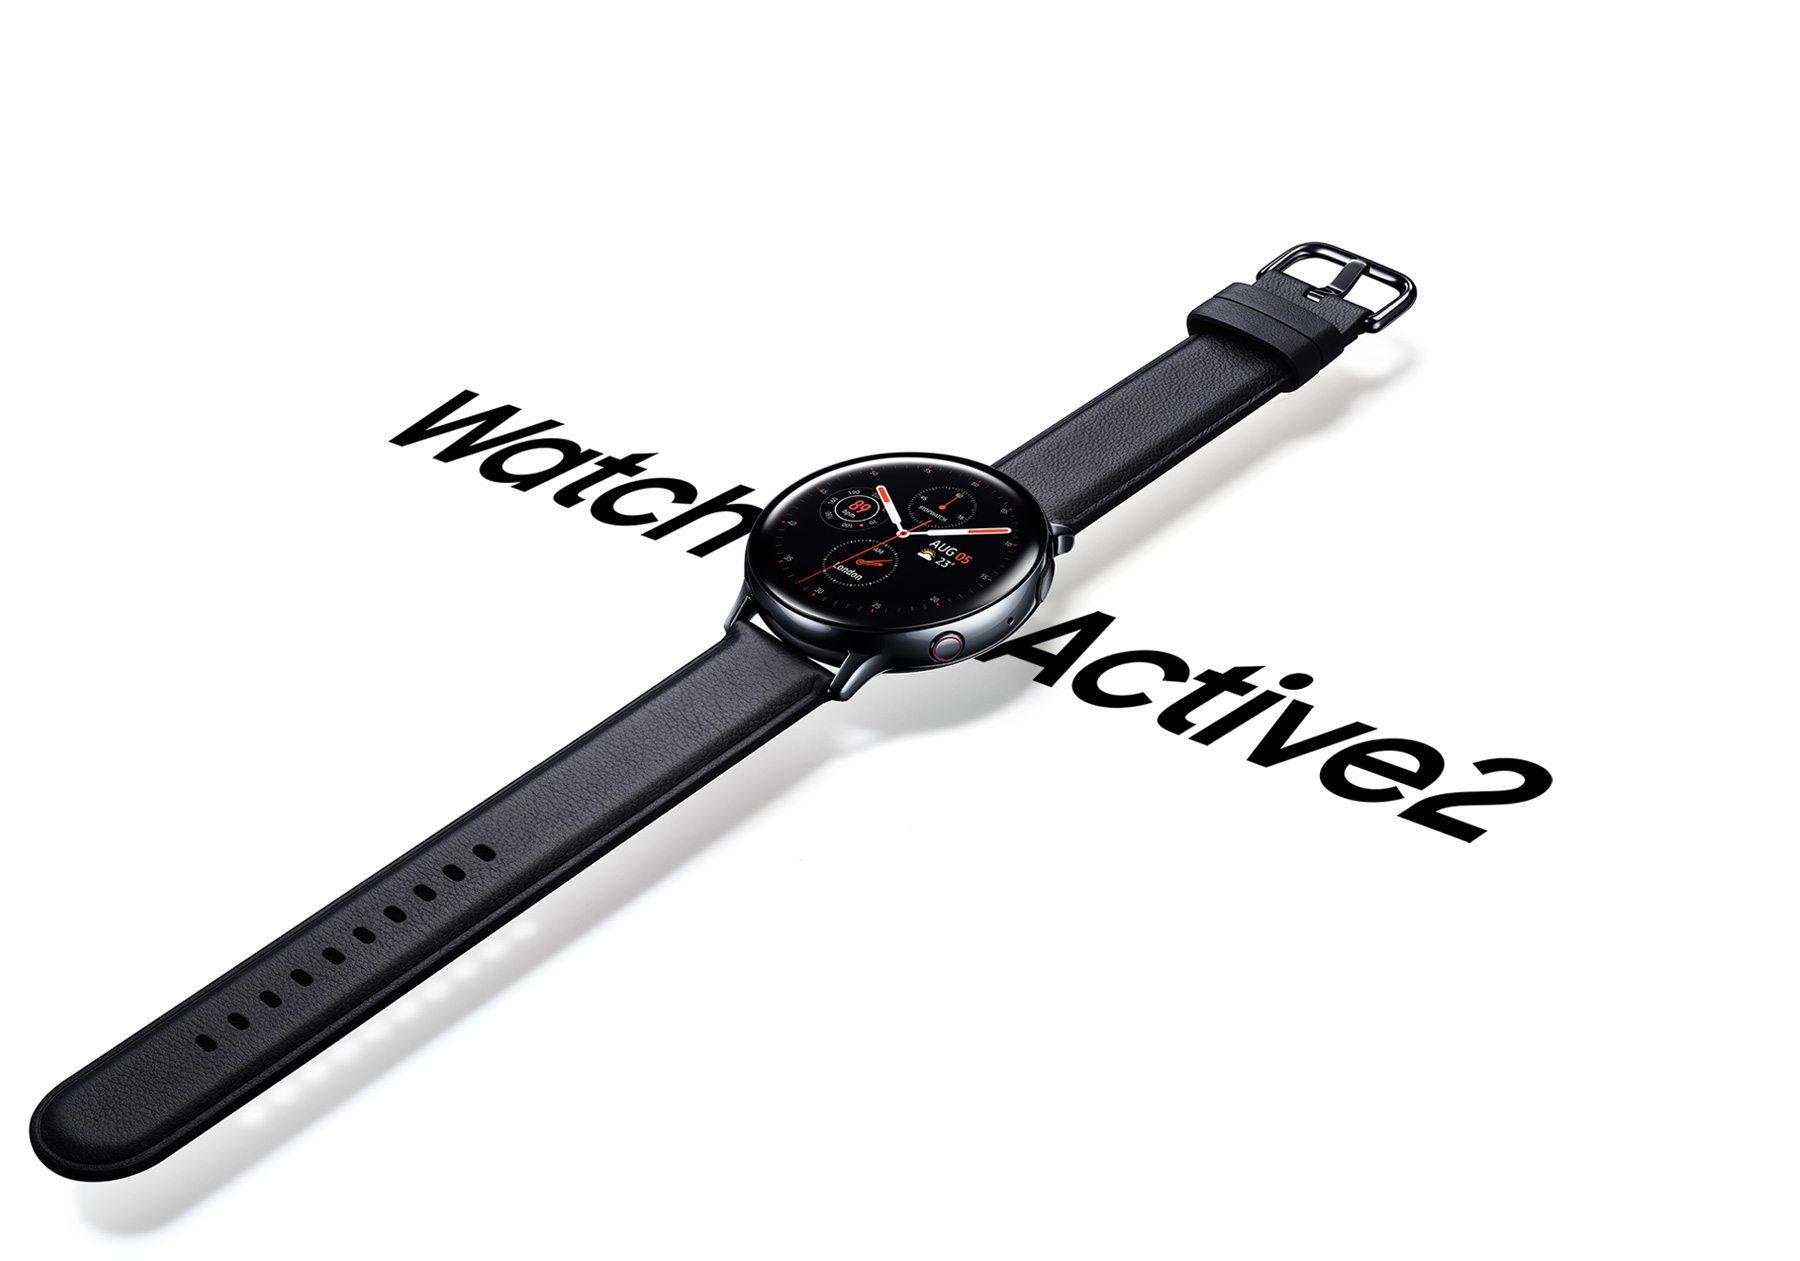 Galaxy Watch Active2 Seen From A Three-quarter Angle - Analog Watch - HD Wallpaper 